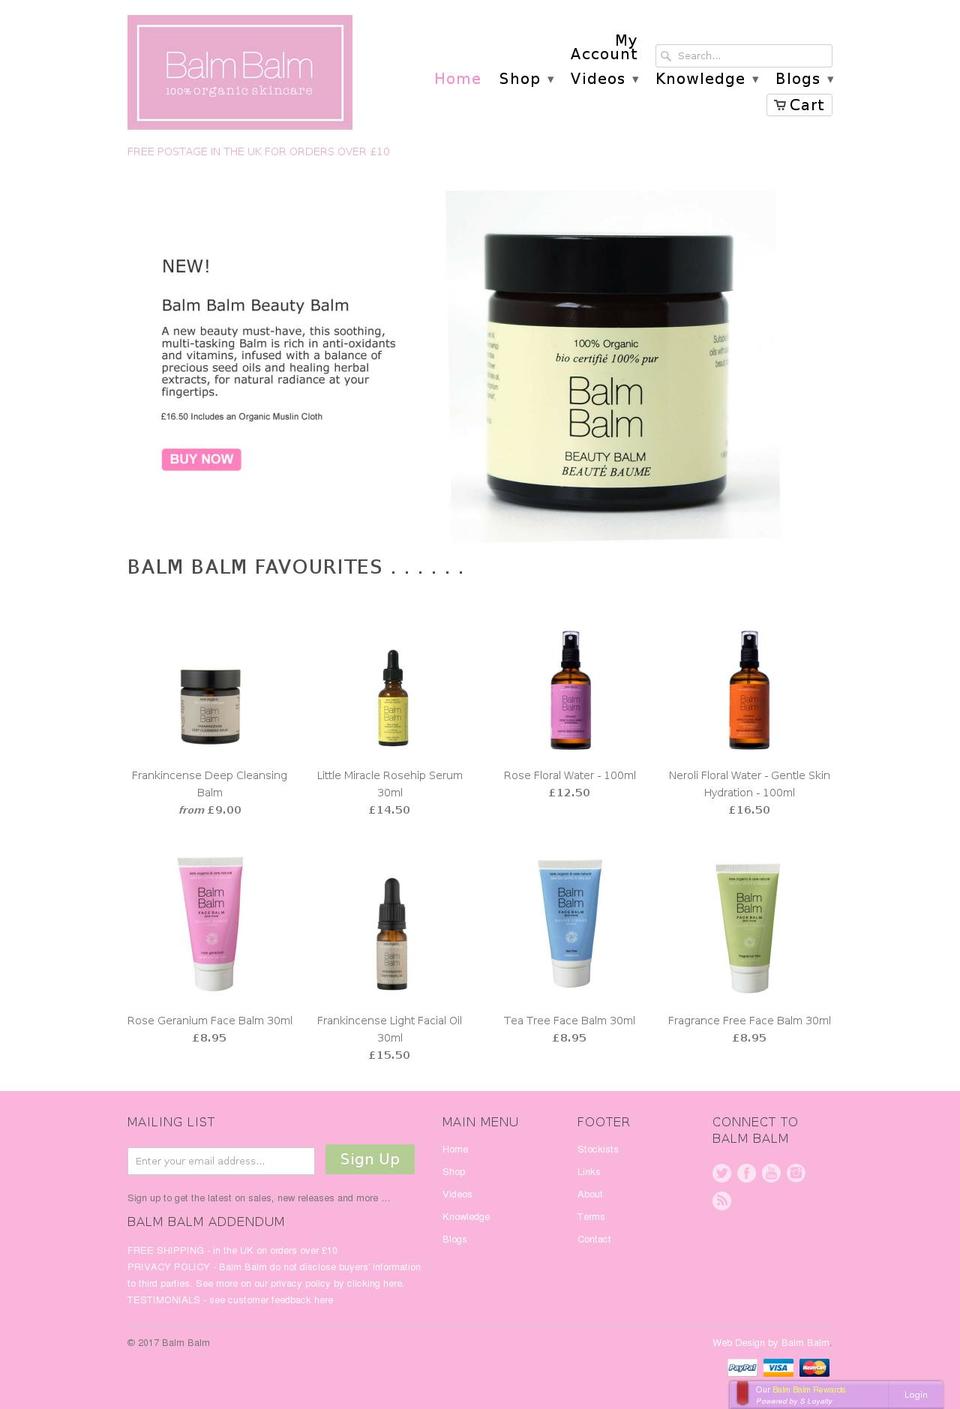 Brooklyn Shopify theme site example balmbalm.com